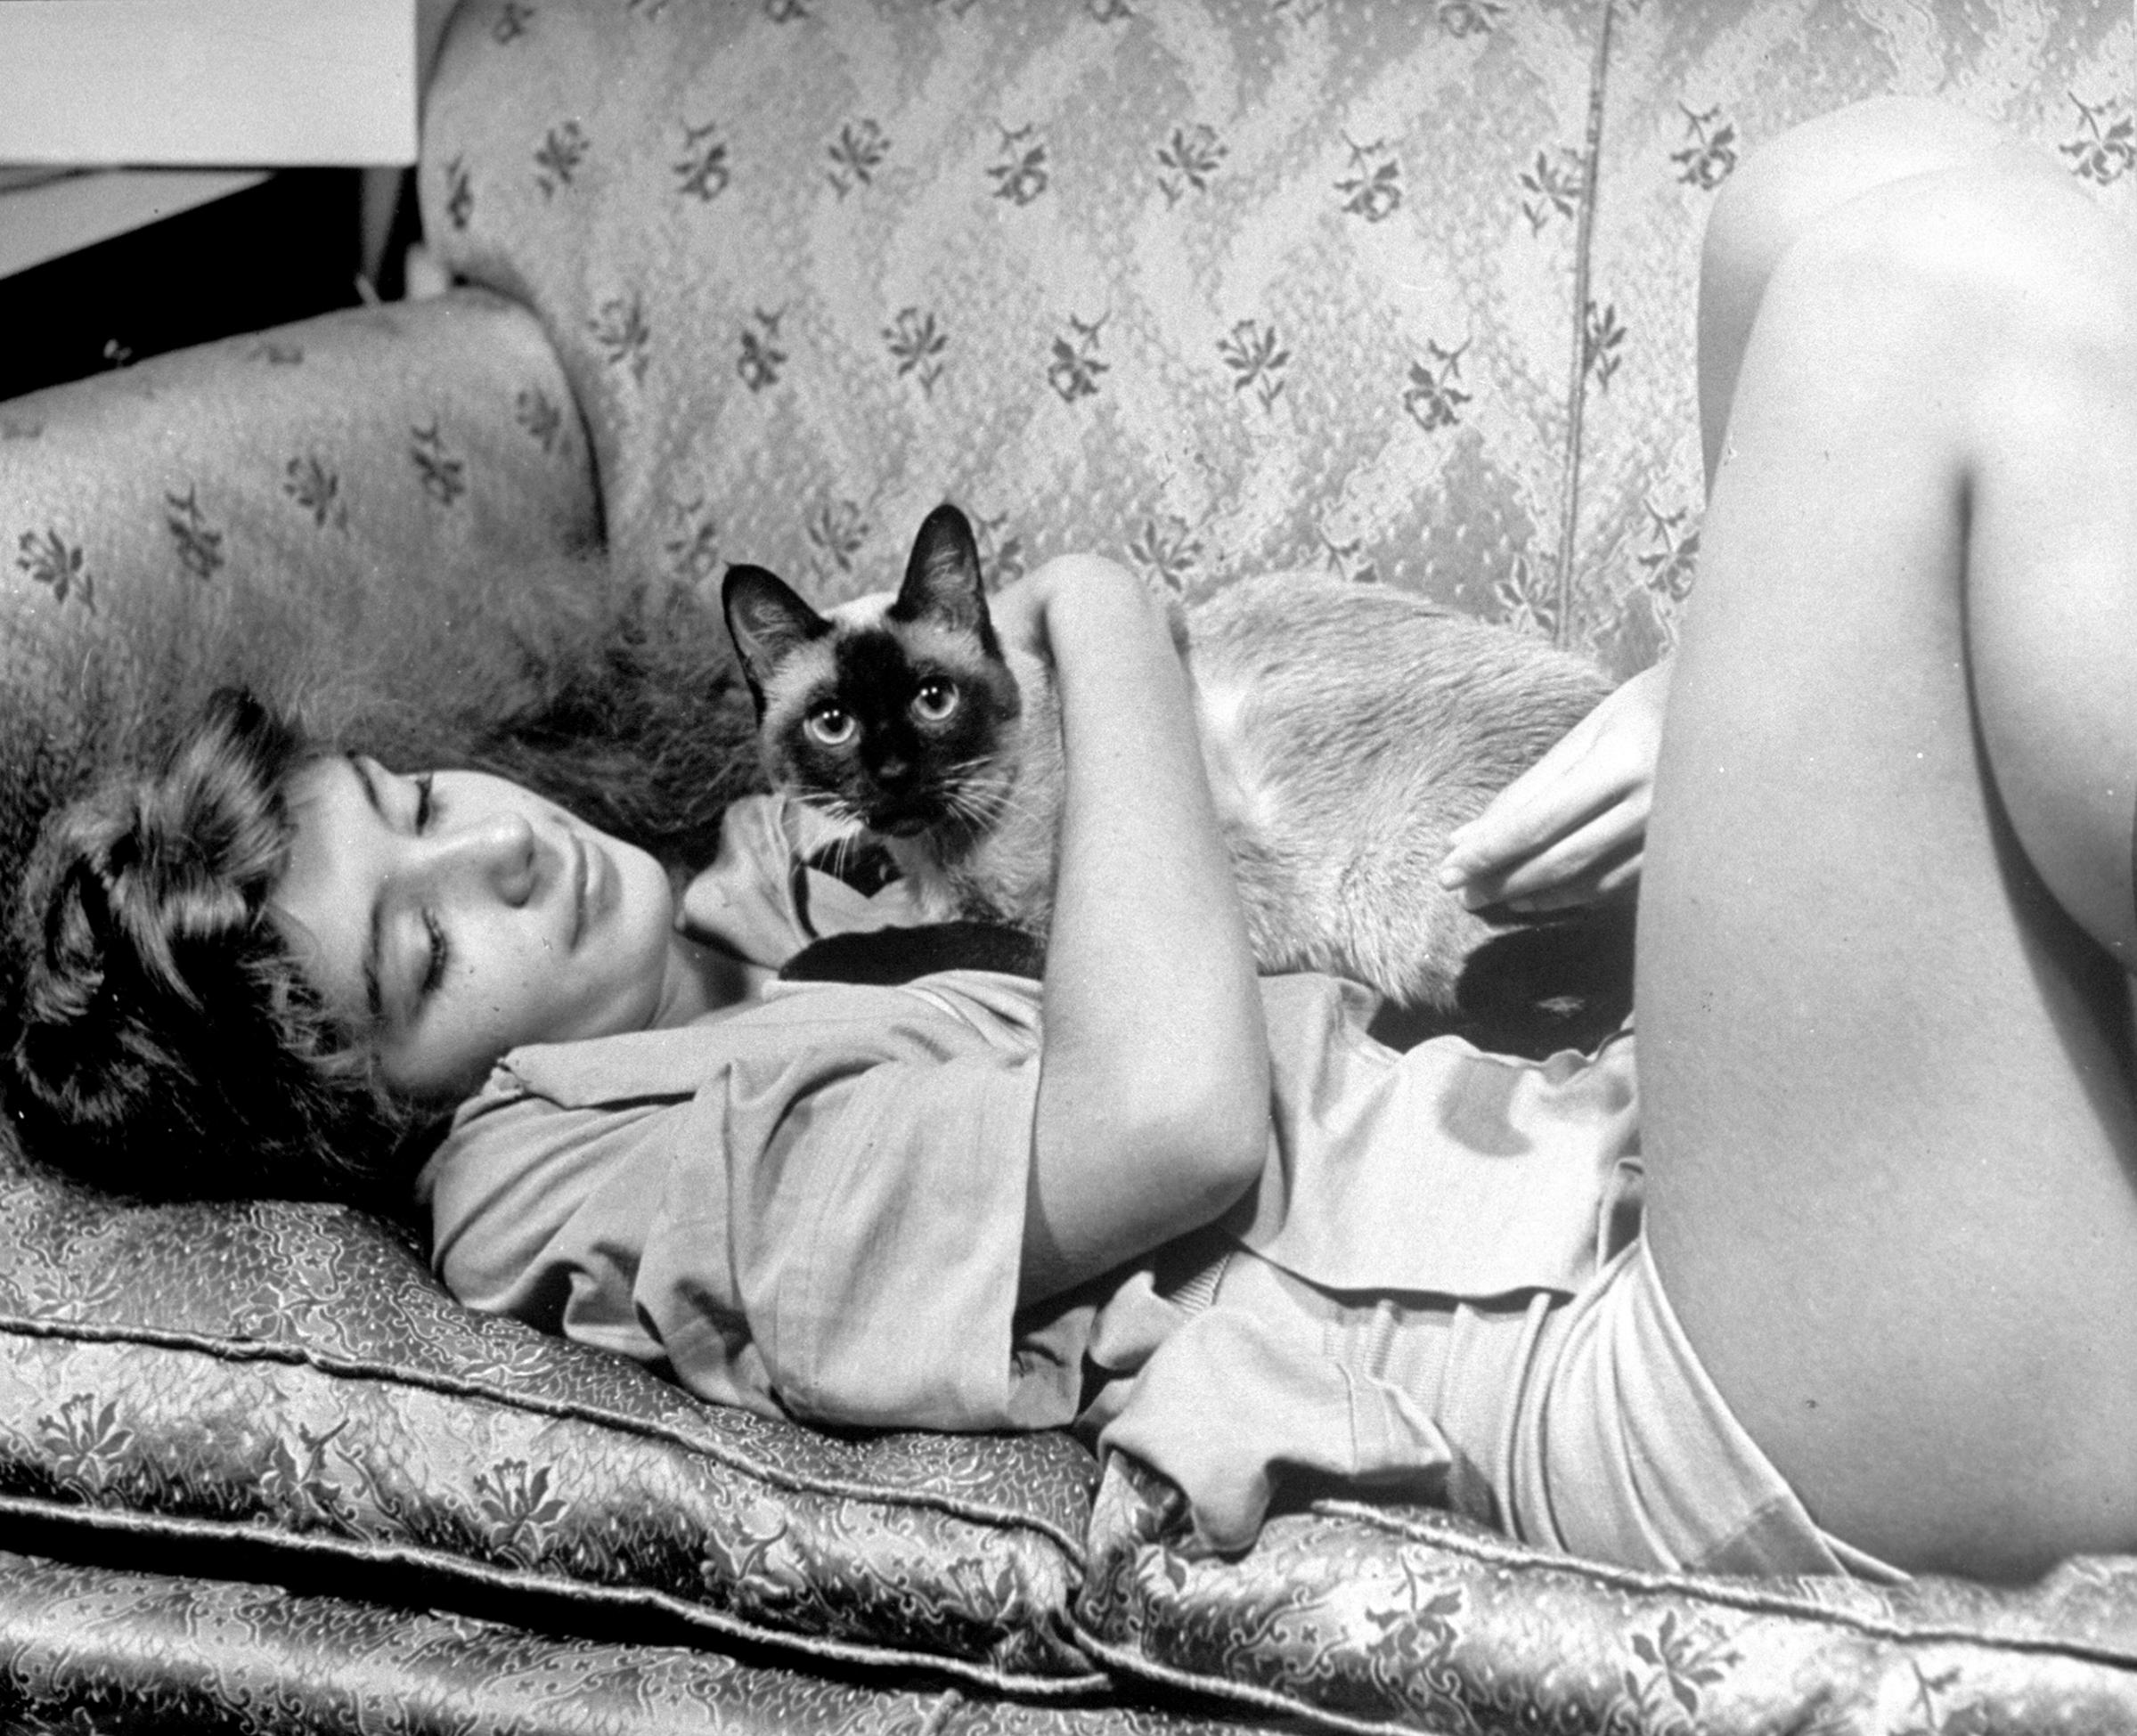 Aspiring ballerina Edwina Seaver relaxing on sofa at home with Siamese cat Ting Ling, 1940.